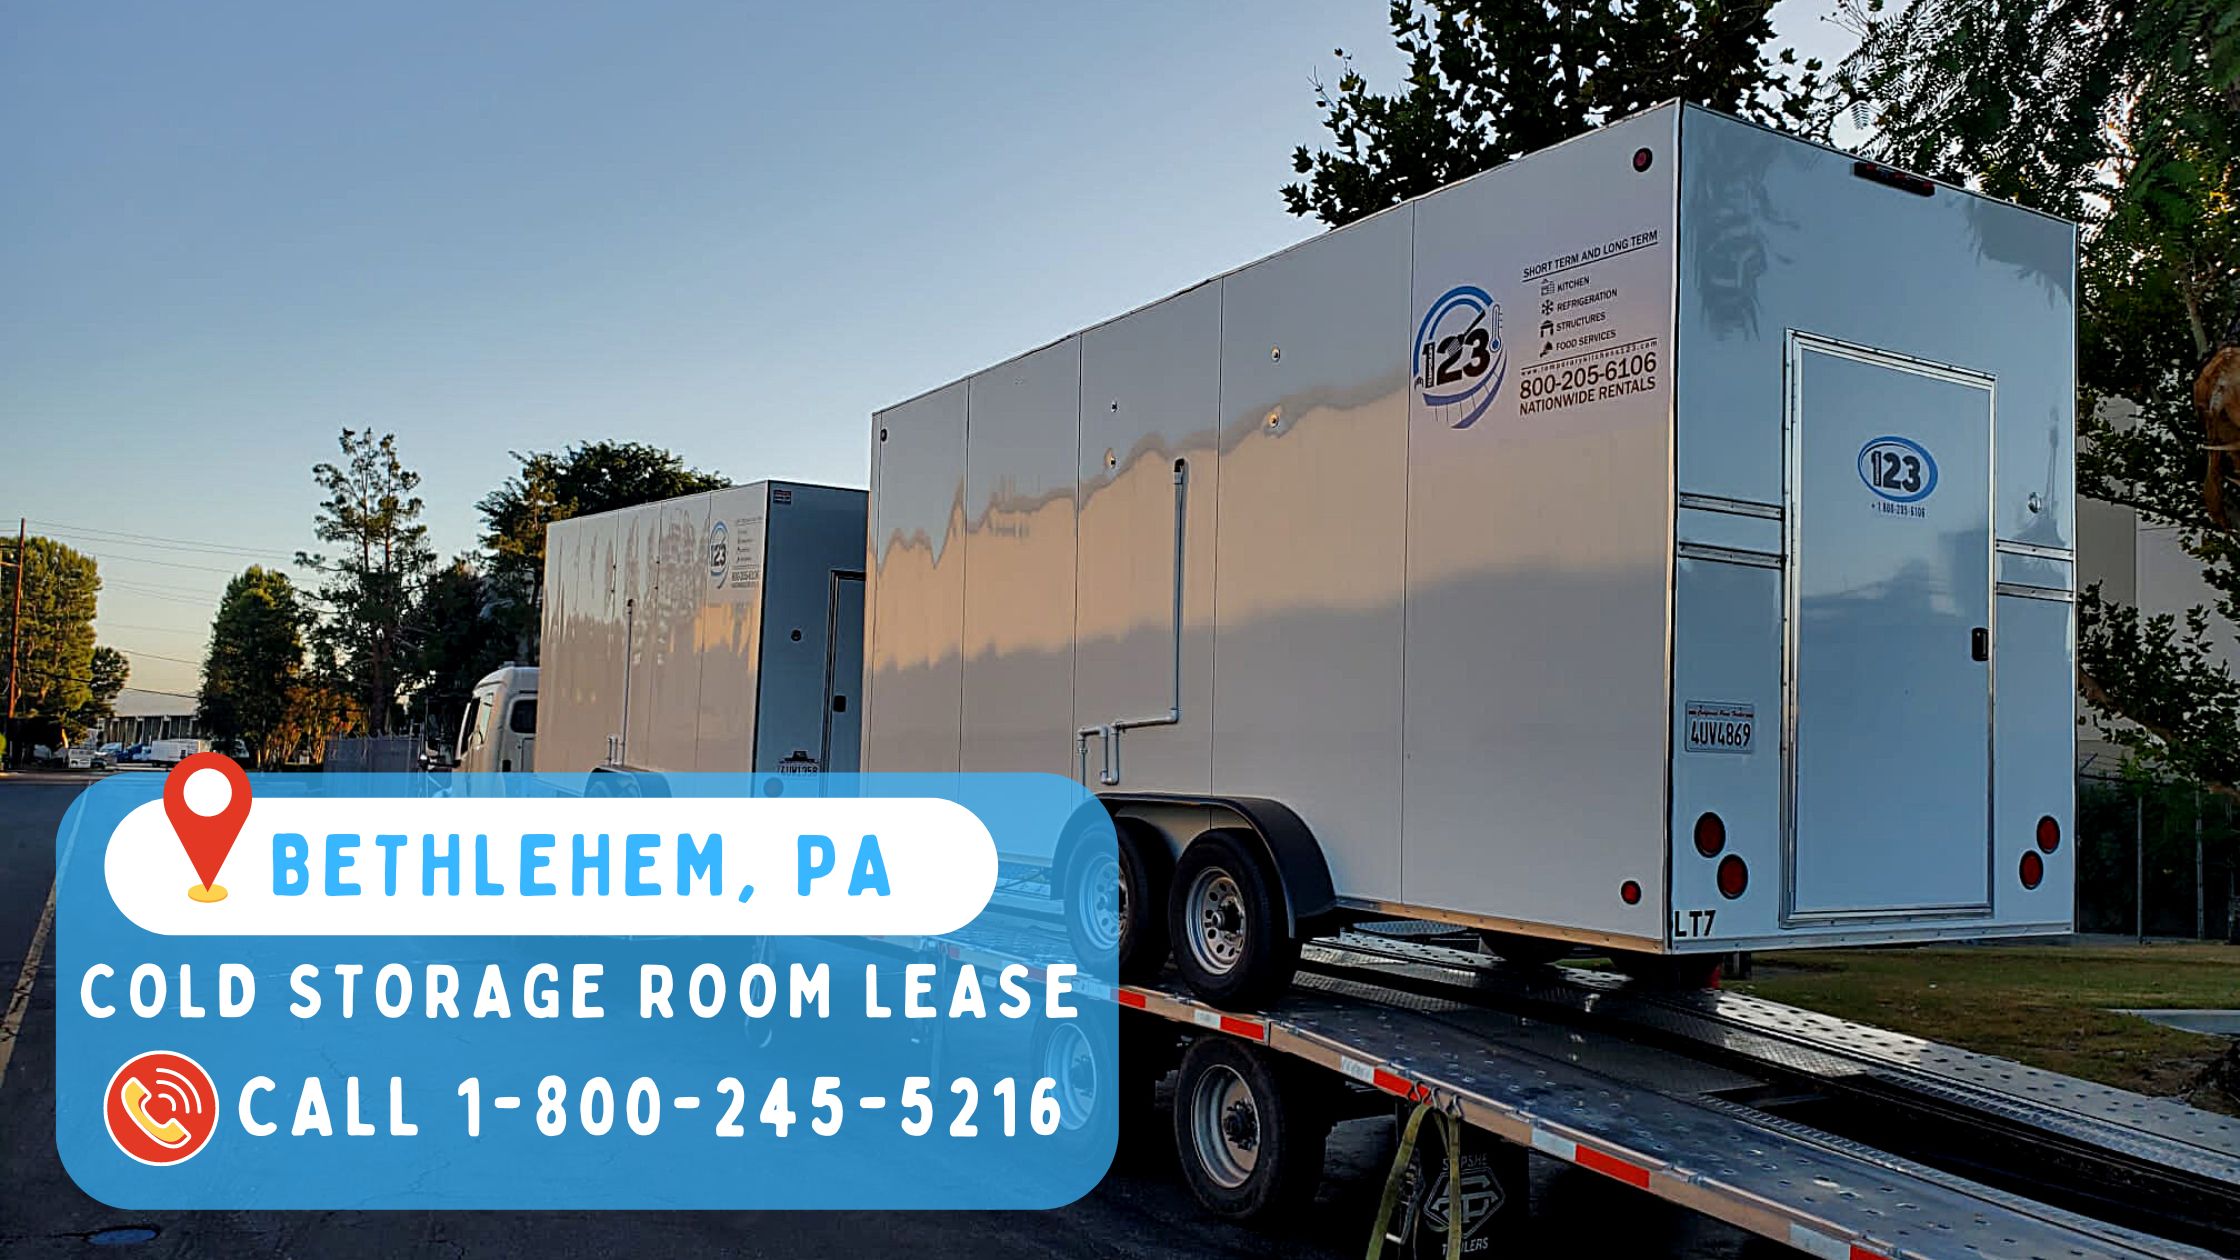 Cold Storage Room Lease in Bethlehem